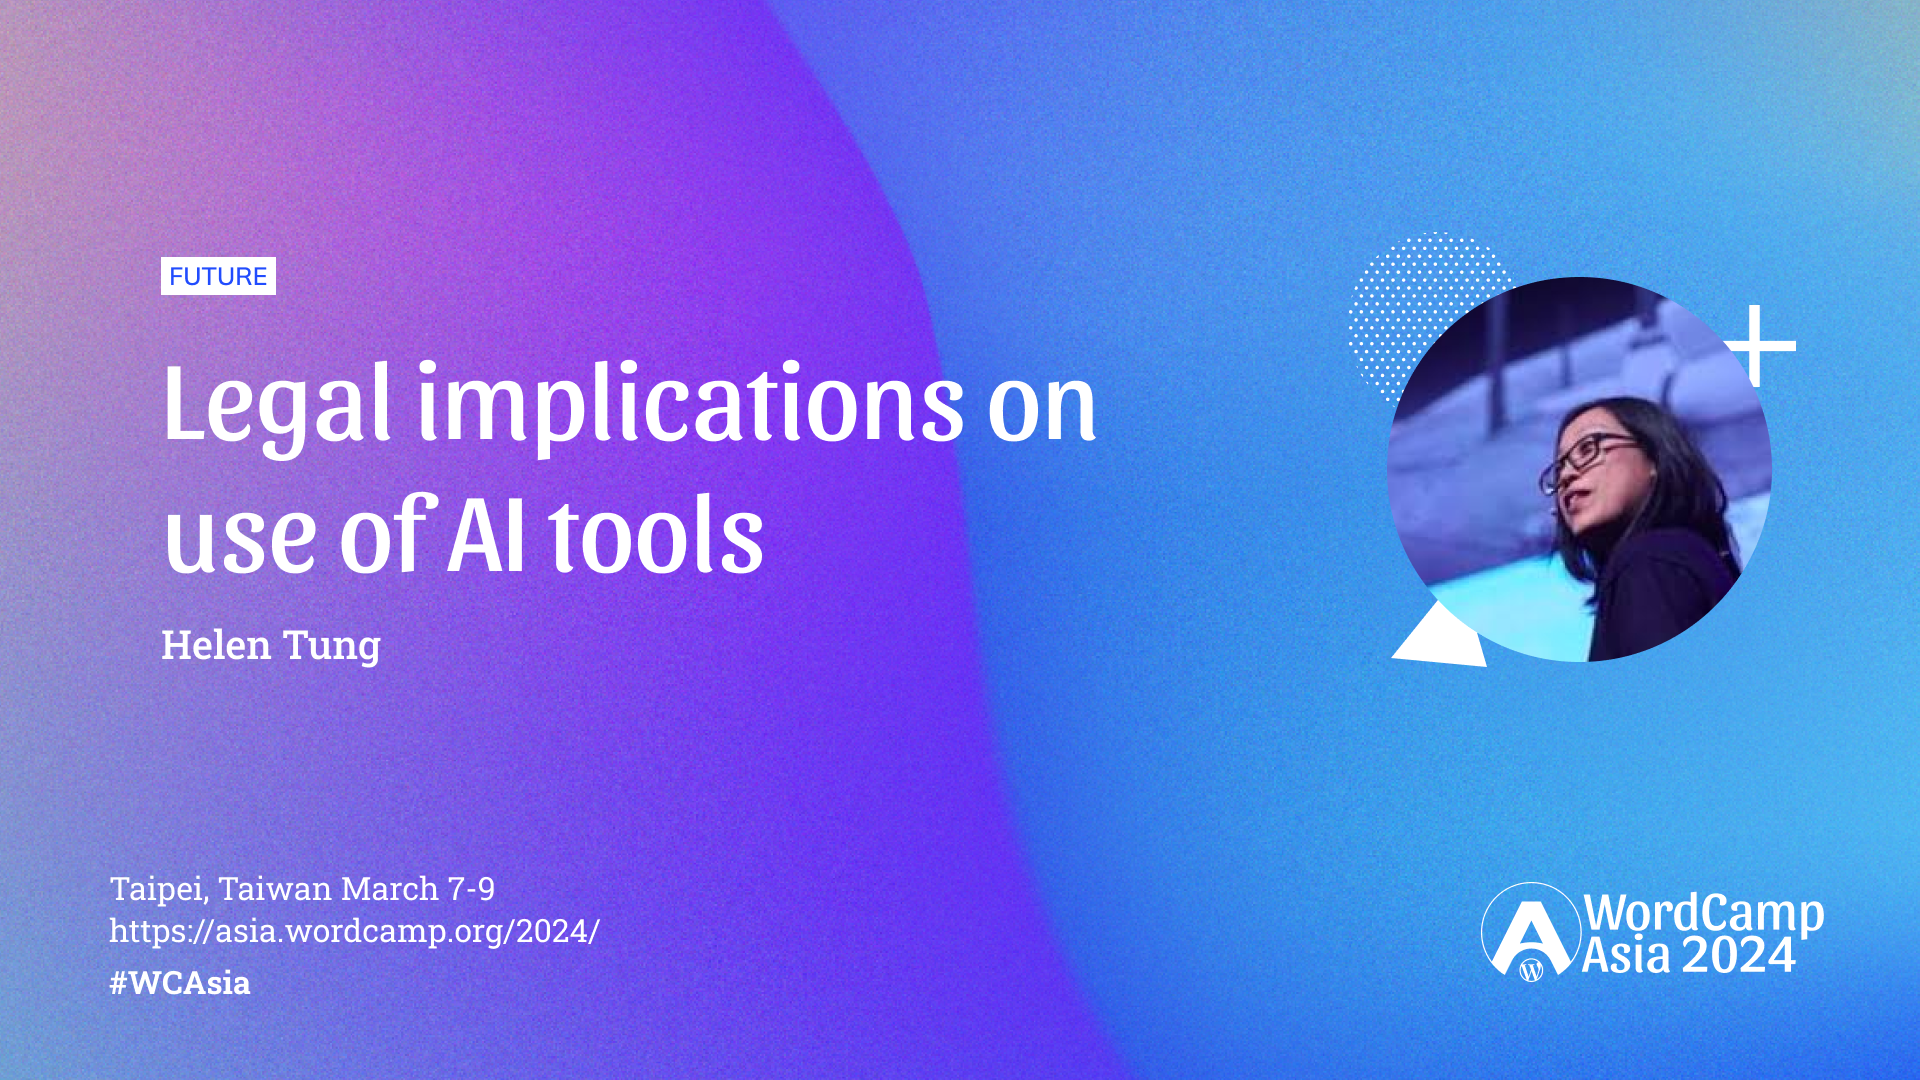 Legal implications on use of AI tools